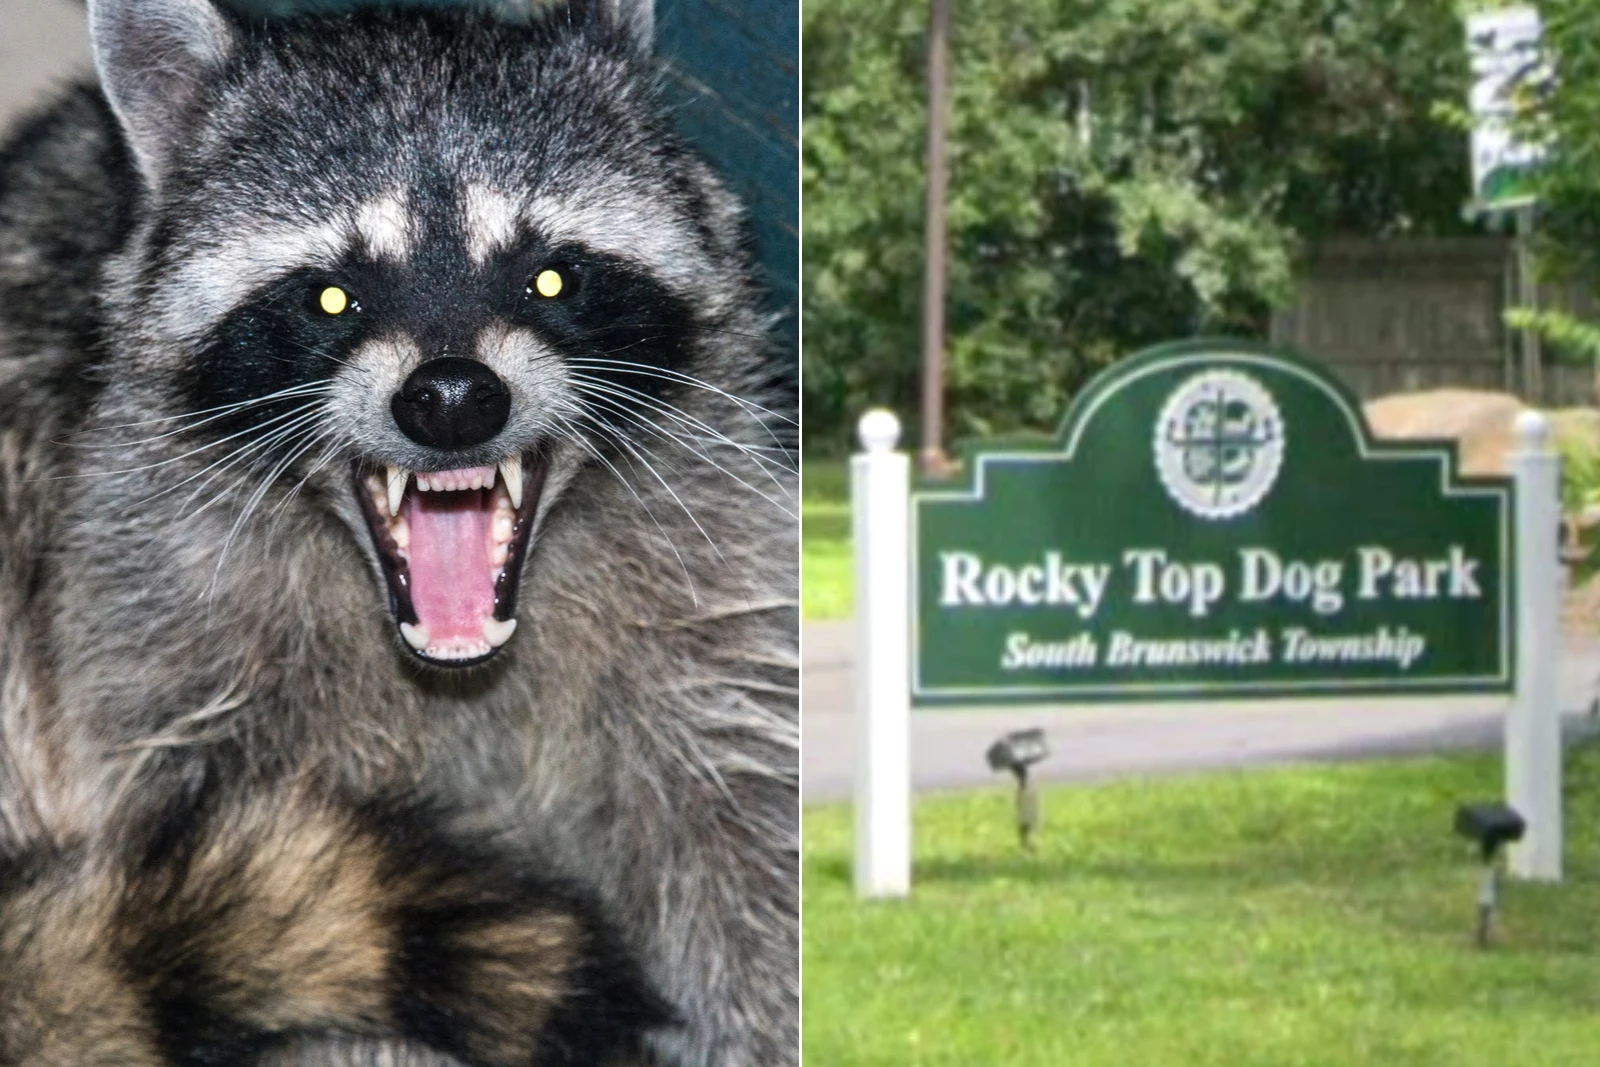 Raccoon tests positive for rabies after fight at NJ dog park